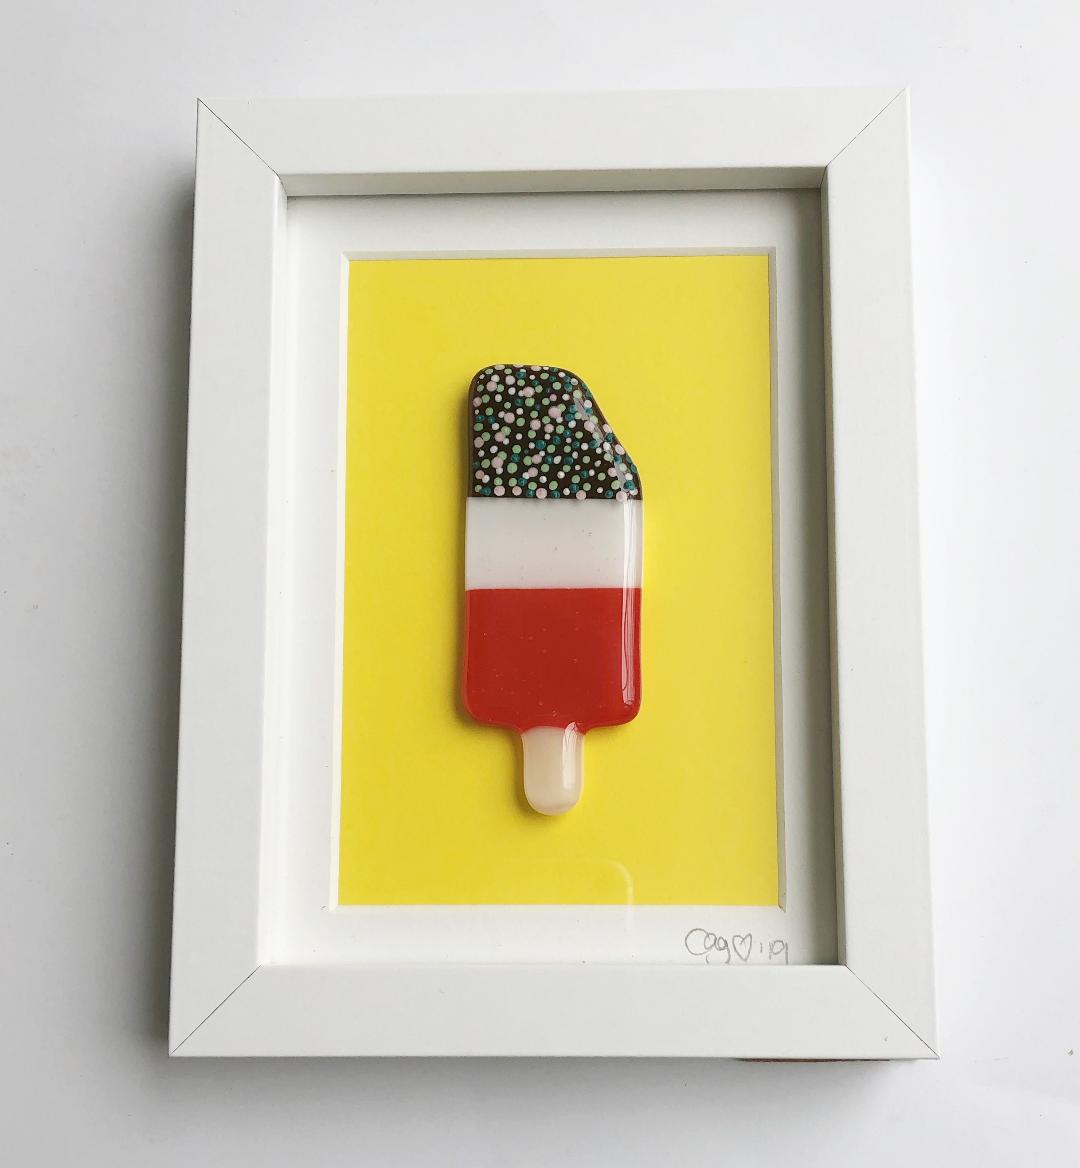 FAB ice lolly